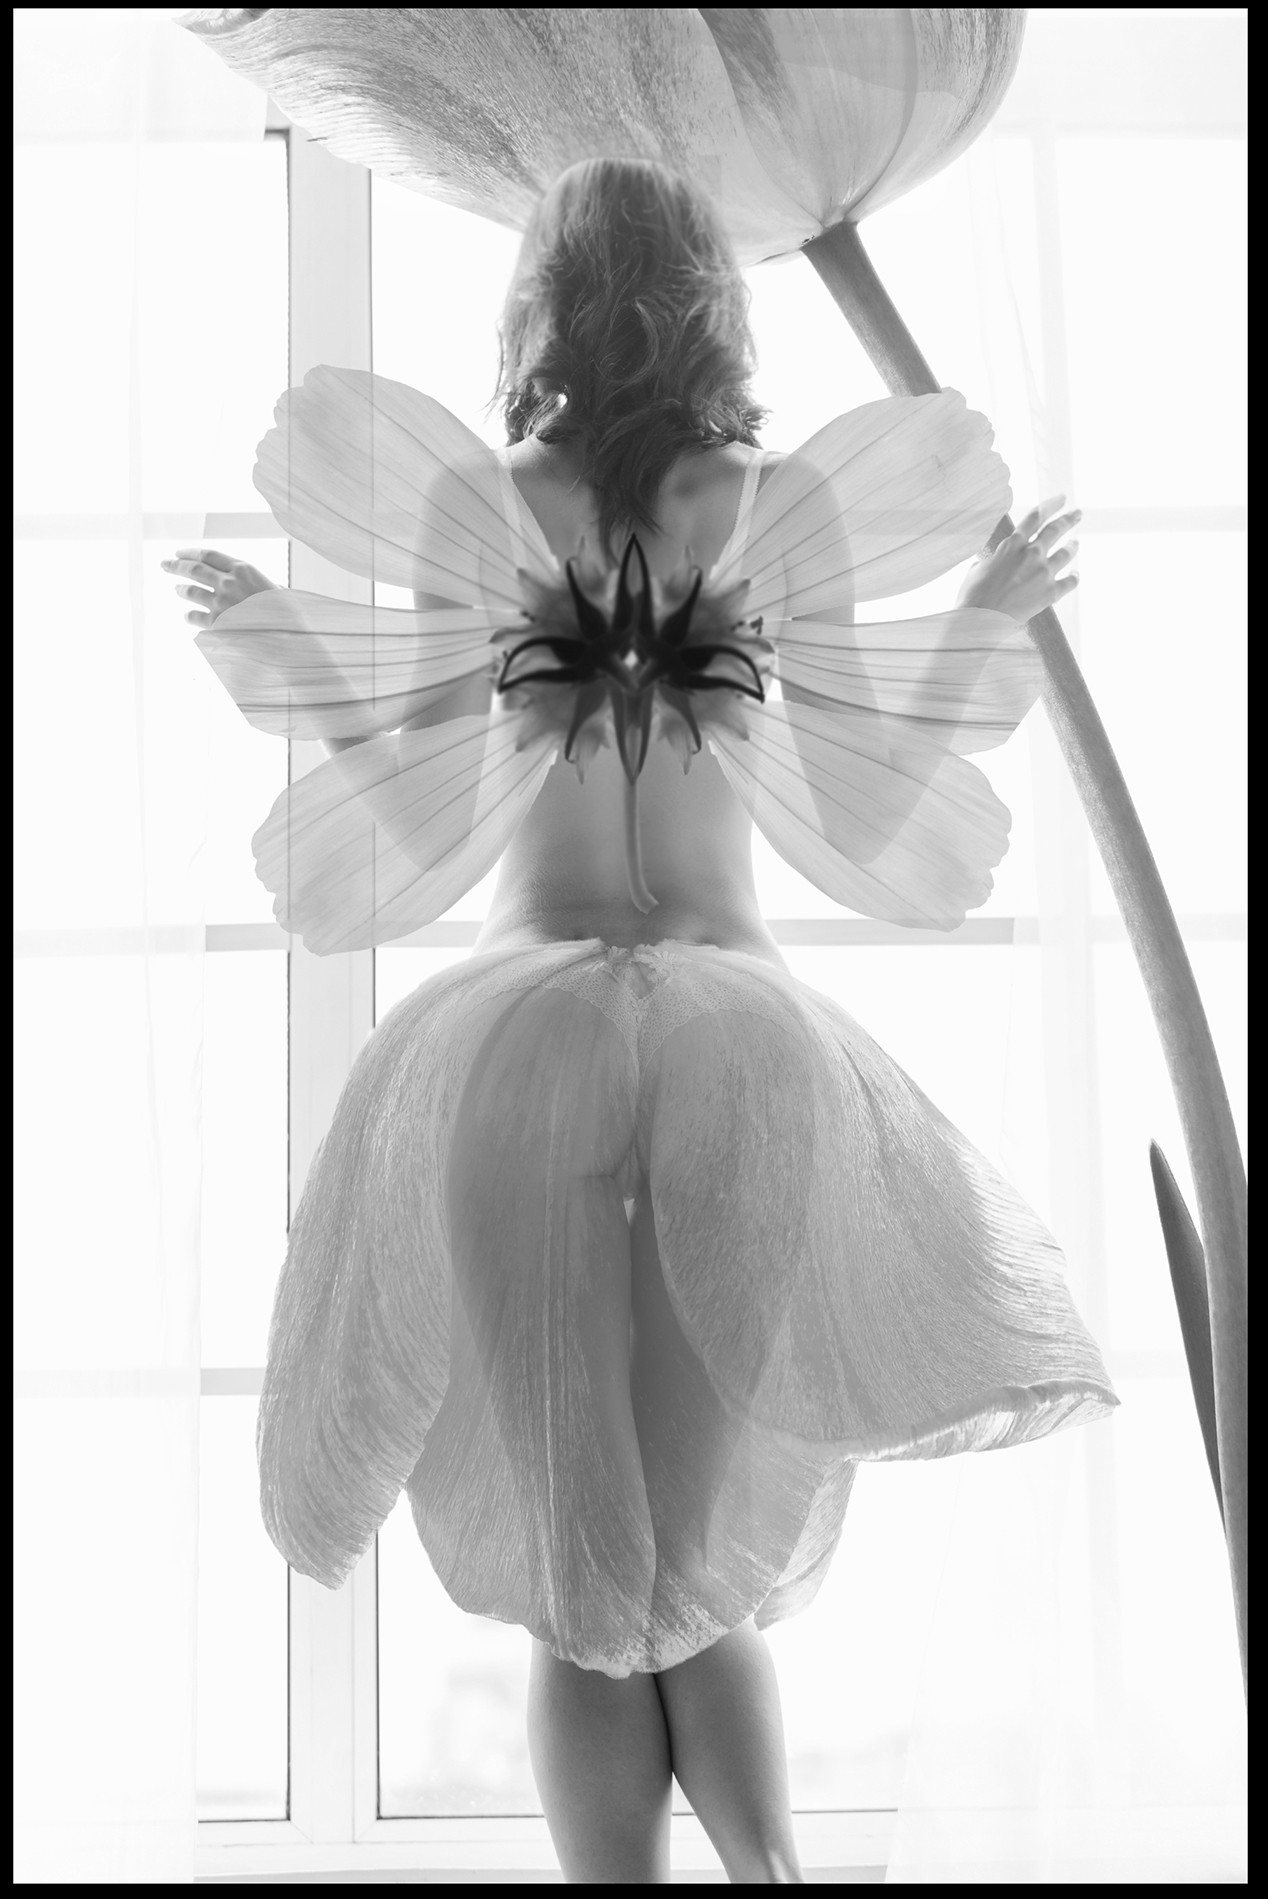 People 1268x1899 fairies wings flowers monochrome see-through clothing women model rear view ass